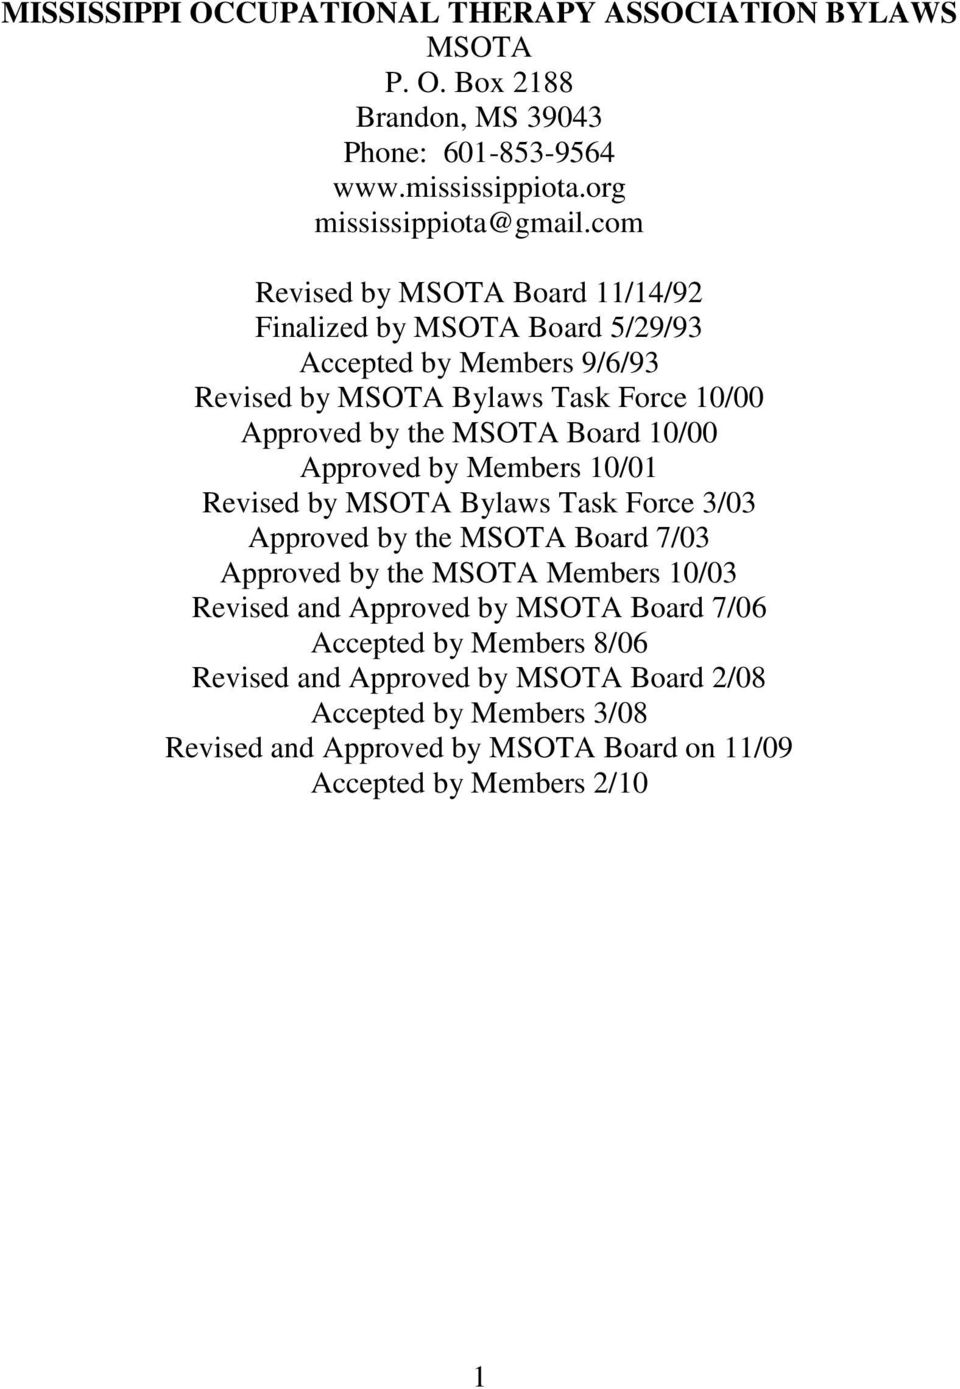 10/00 Approved by Members 10/01 Revised by MSOTA Bylaws Task Force 3/03 Approved by the MSOTA Board 7/03 Approved by the MSOTA Members 10/03 Revised and Approved by